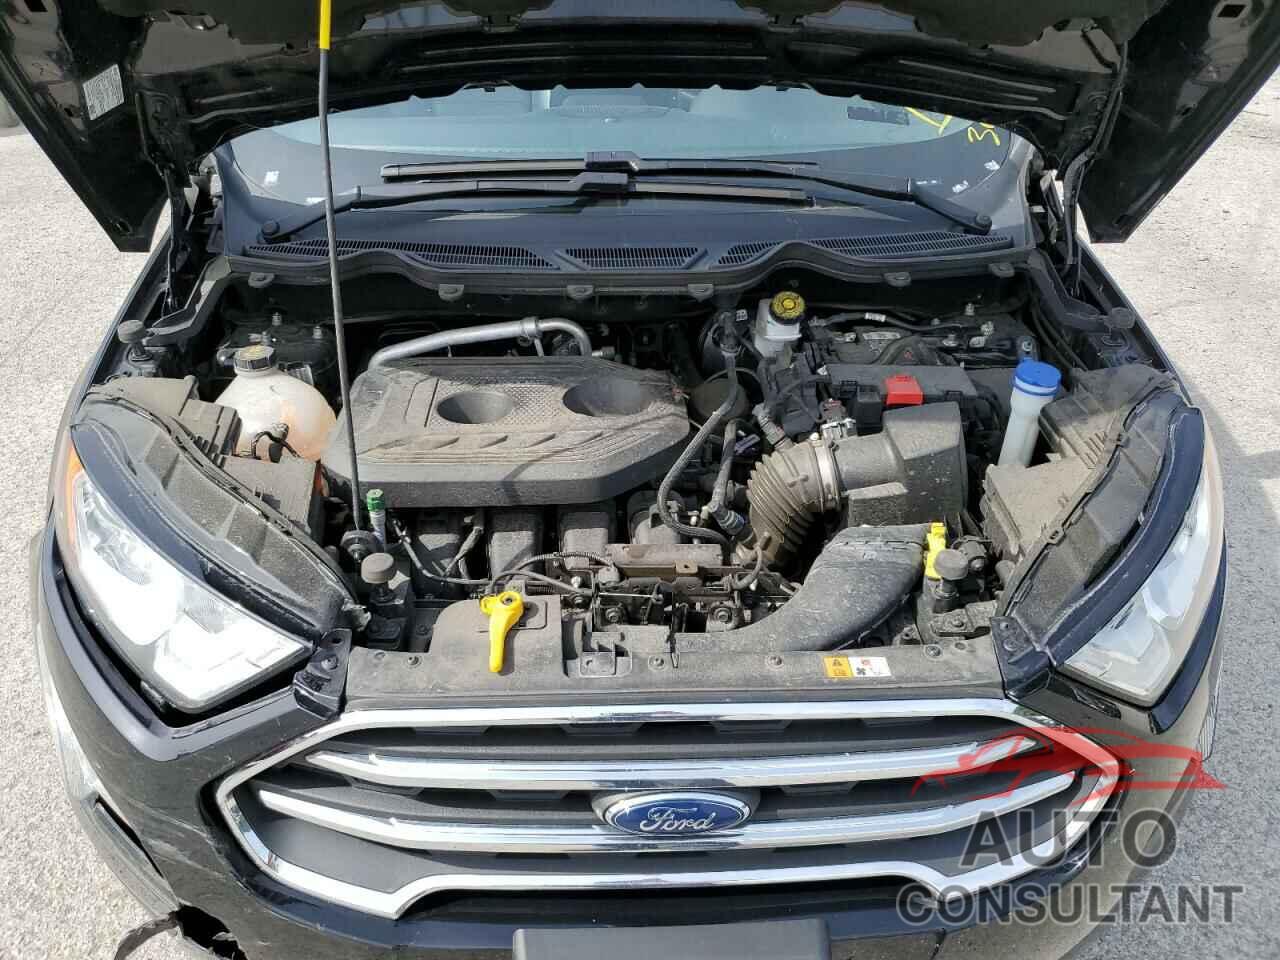 FORD ALL OTHER 2020 - MAJ6S3KLXLC327446